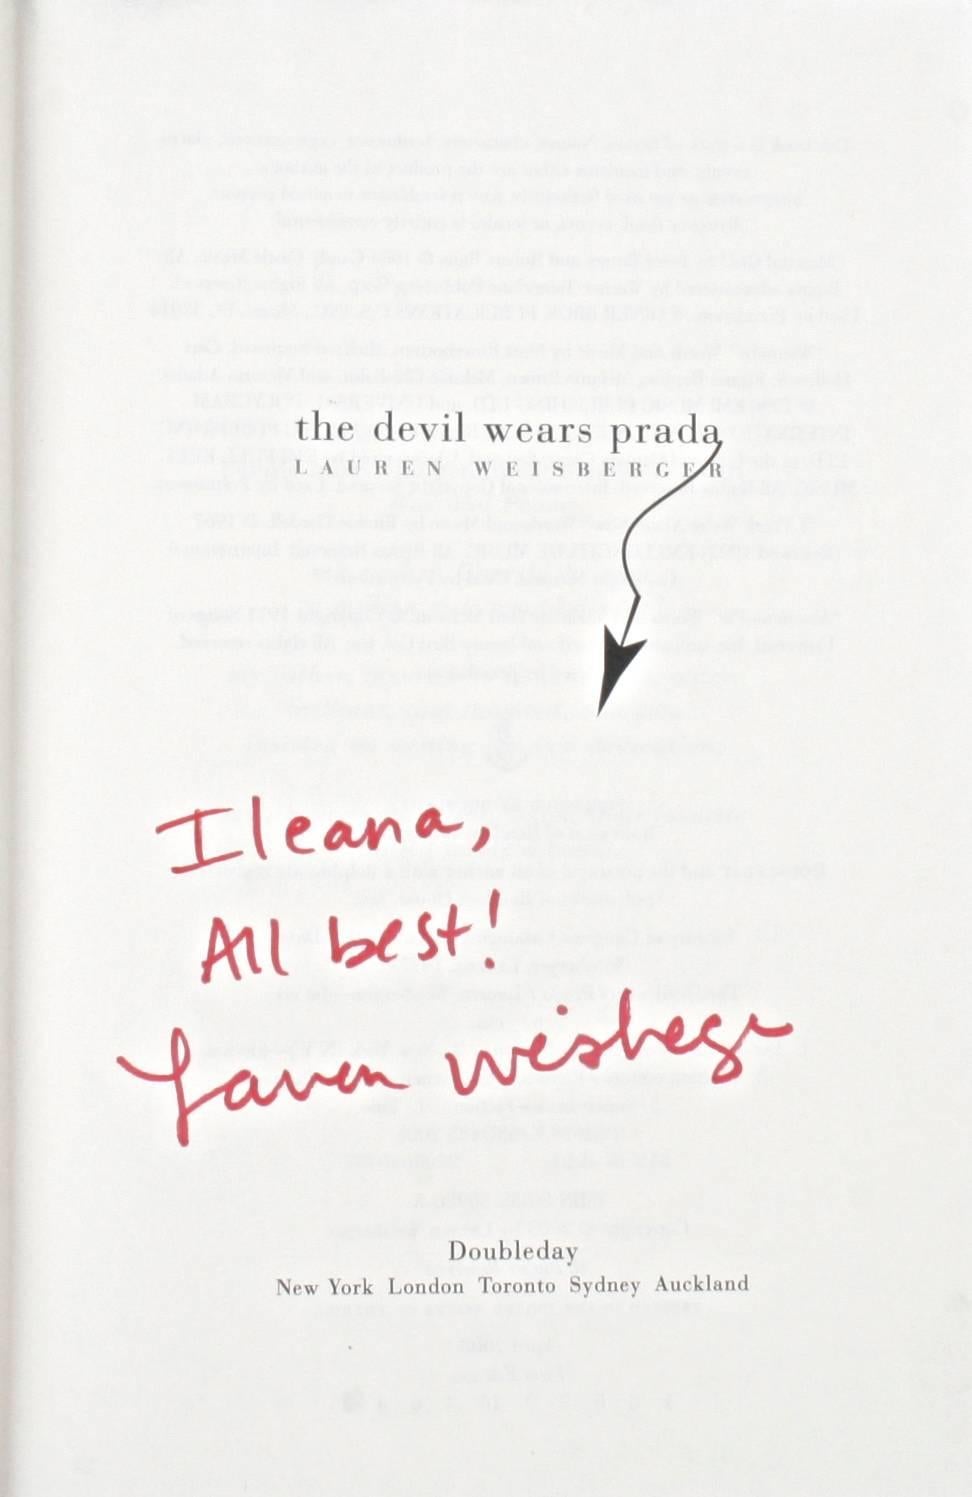 The Devil Wears Prada by Lauren Weisberger. New York: Doubleday, 2003. Signed first edition hardcover with dust jacket. 360 pp. The infamous novel about Andrea Sachs, the small town girl who fresh out of college, lands a job working for, 